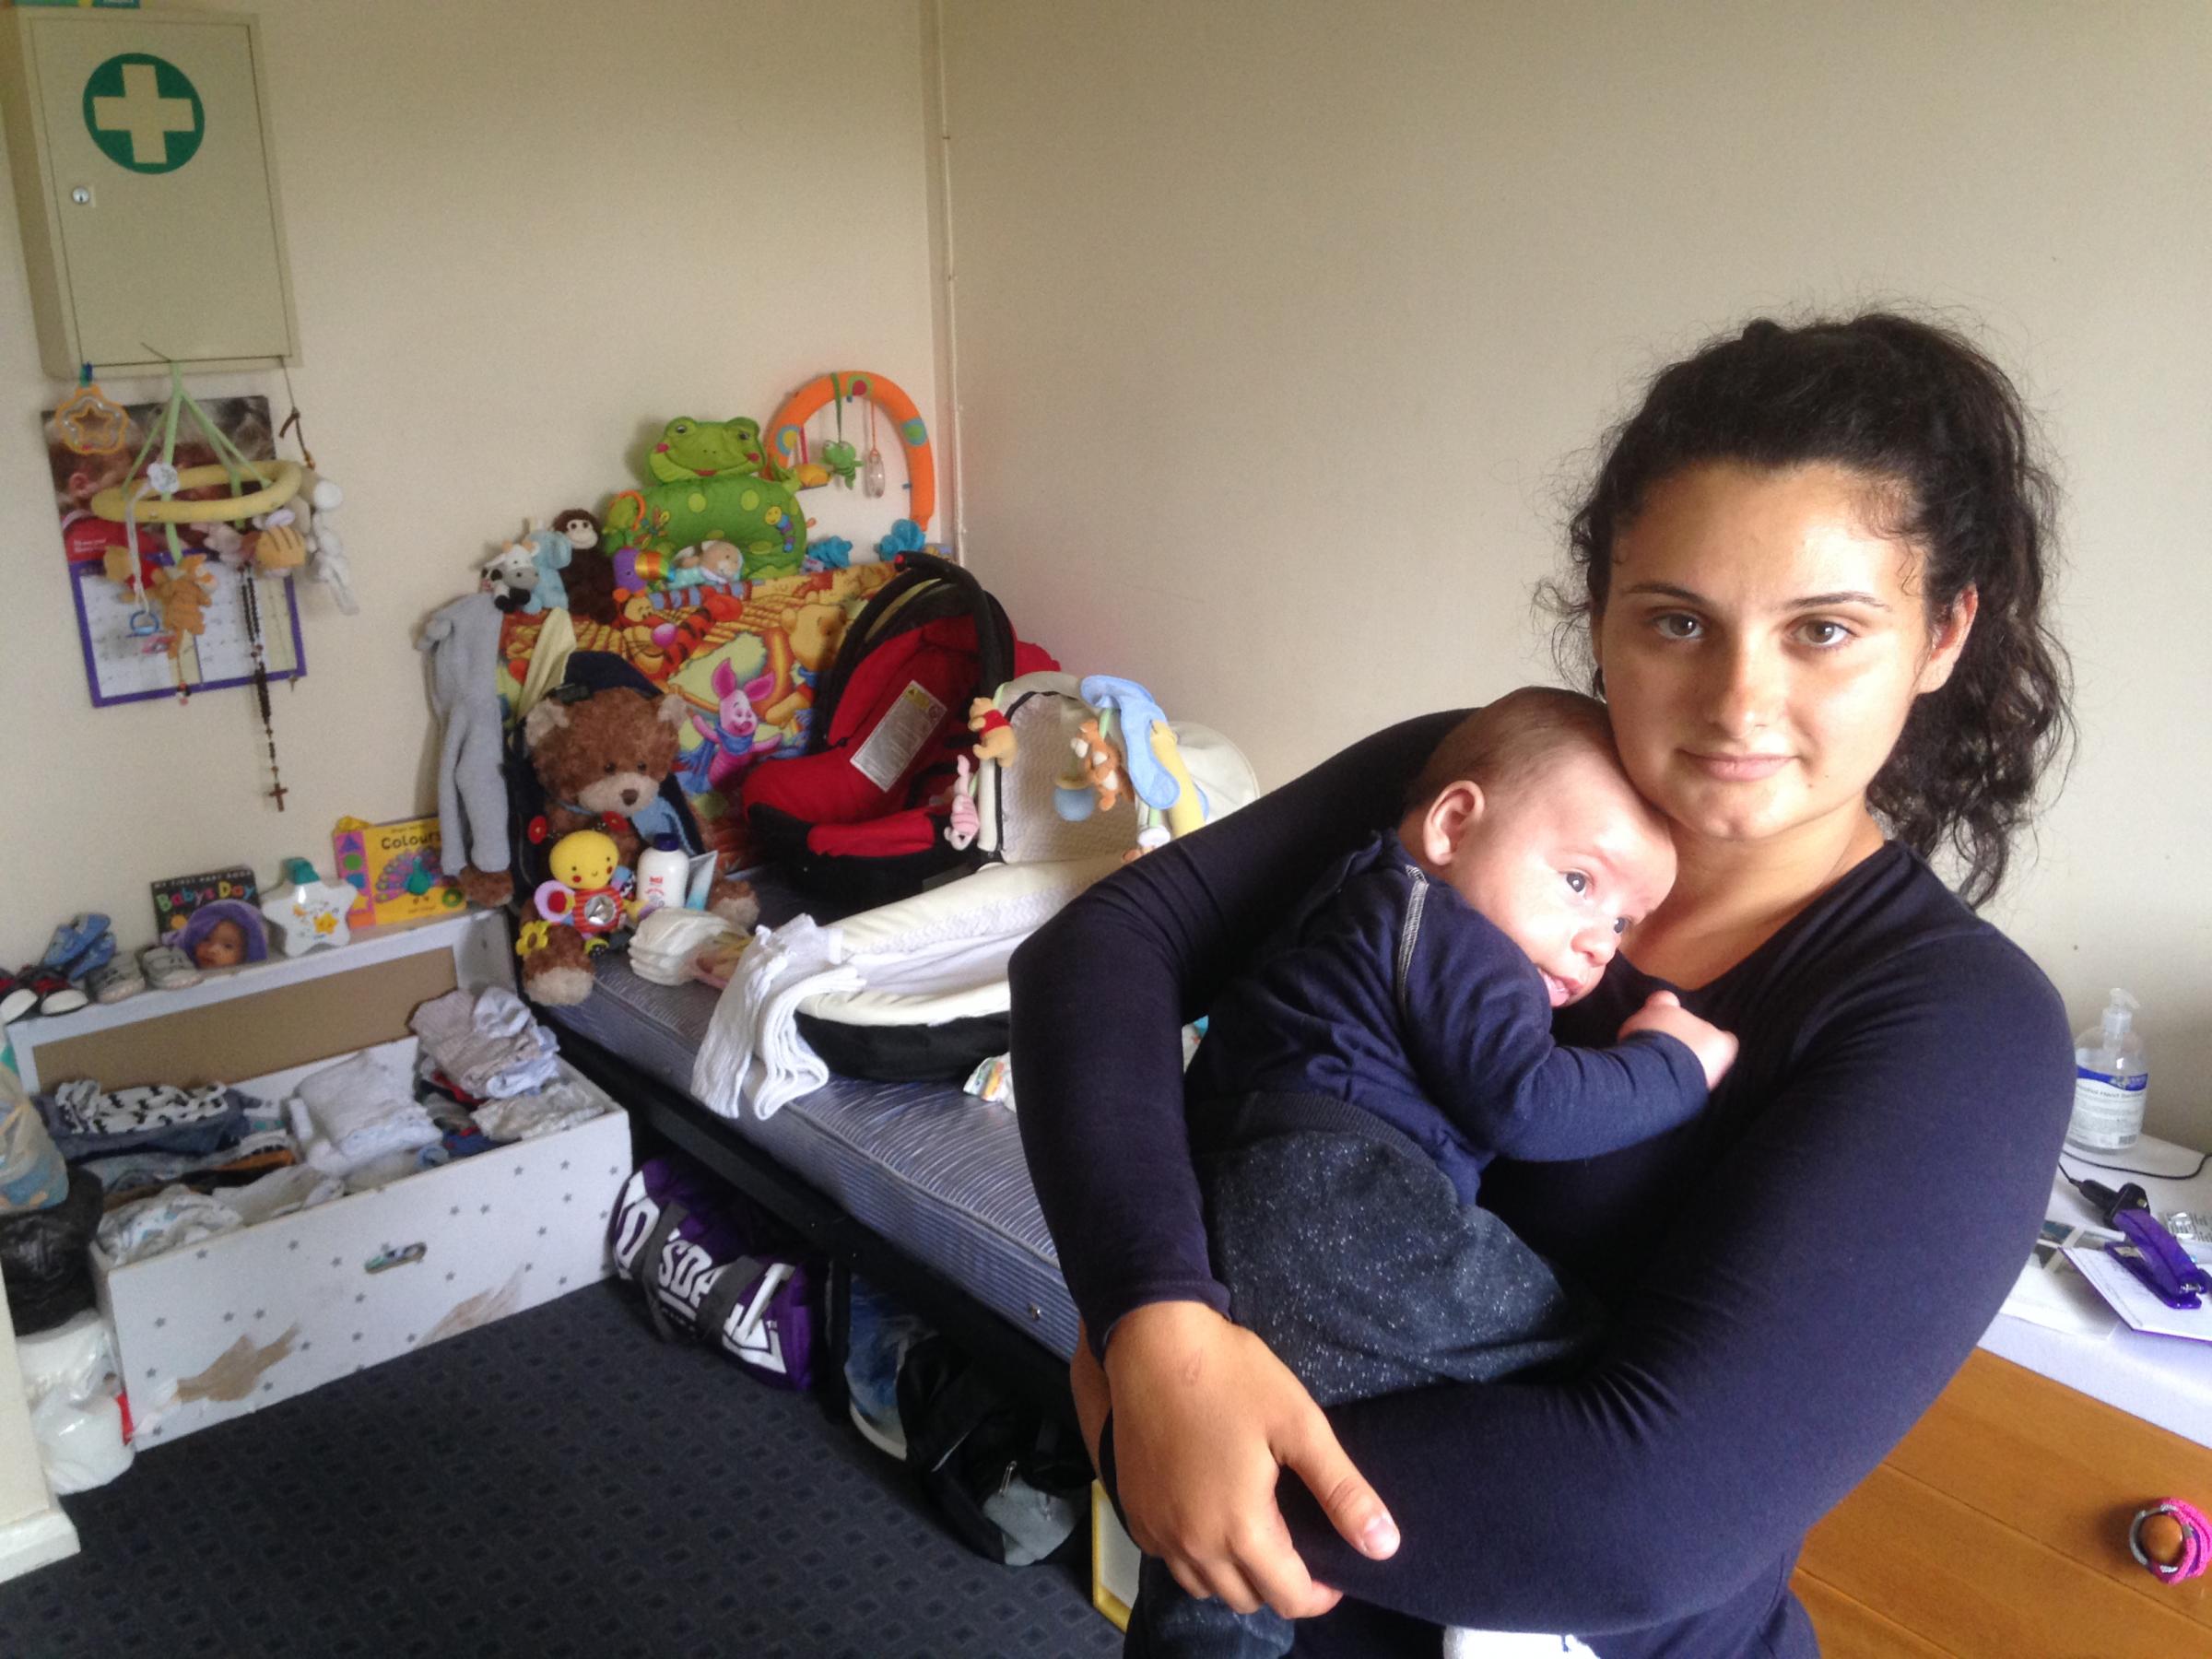 Tiny room 'unsuitable' for single mum and seven-week old baby